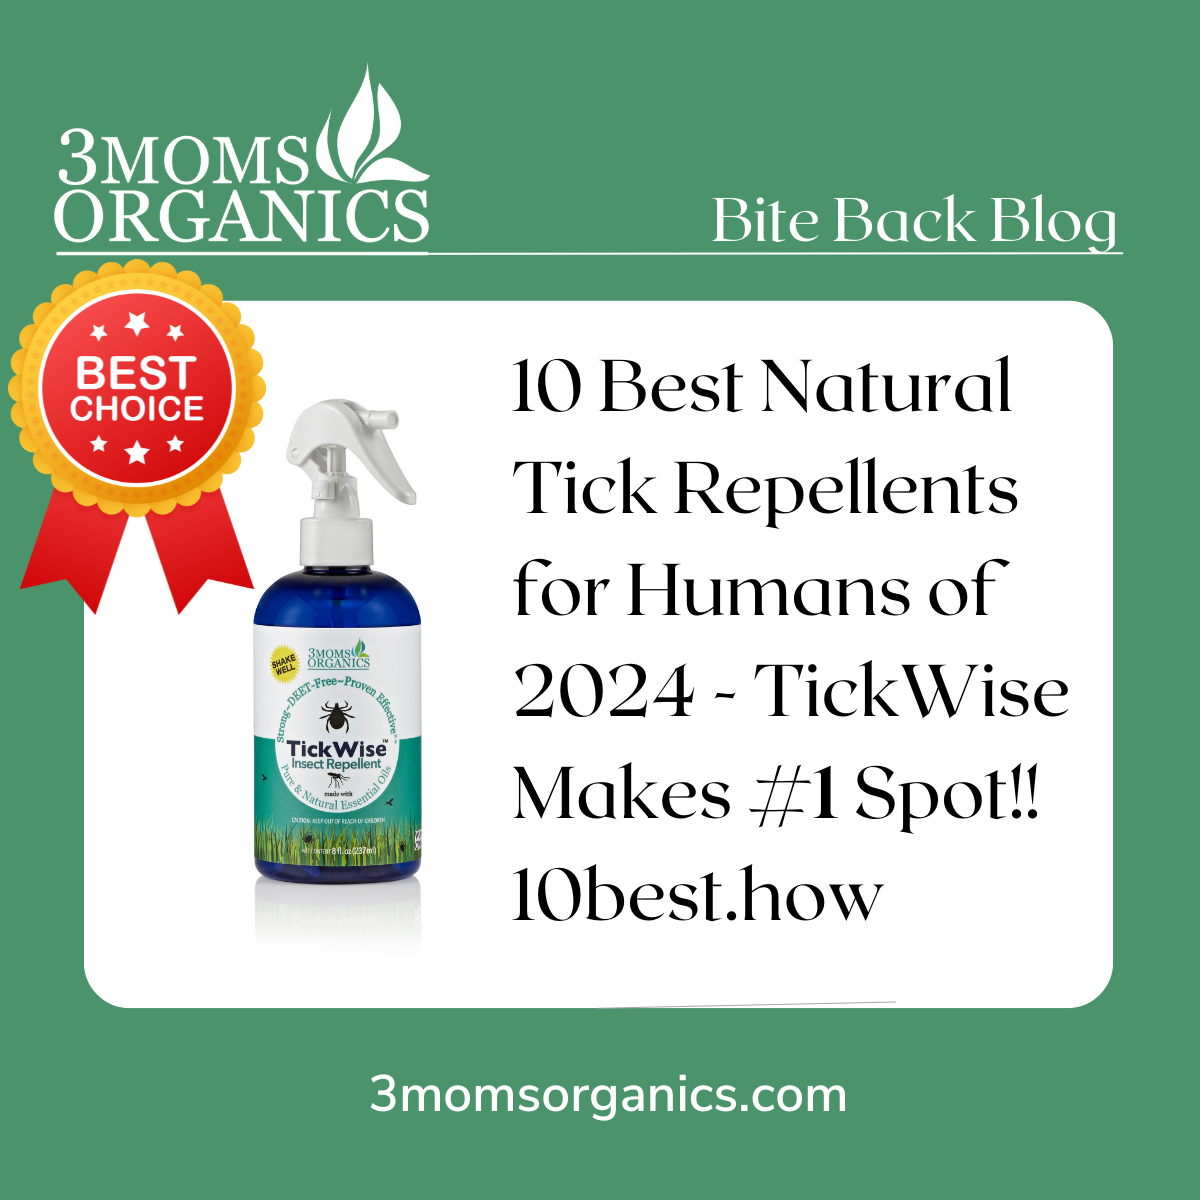 TickWise Takes the Lead: Celebrating Our Natural Tick Repellent's Top Recognition!